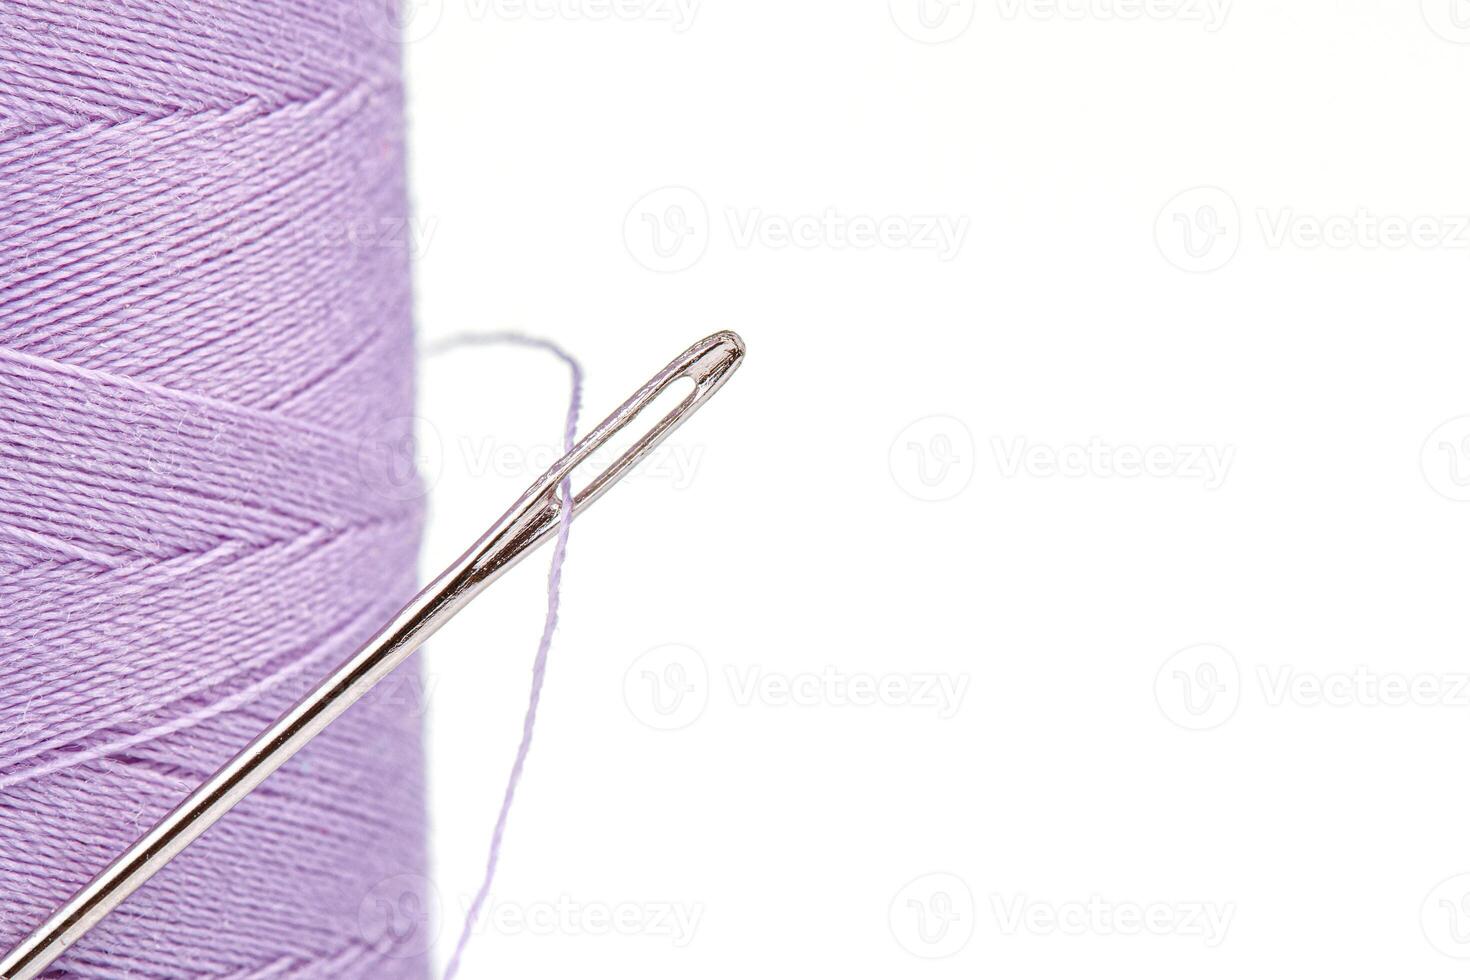 Macro skein of thread purple colors with a needle on a white background photo